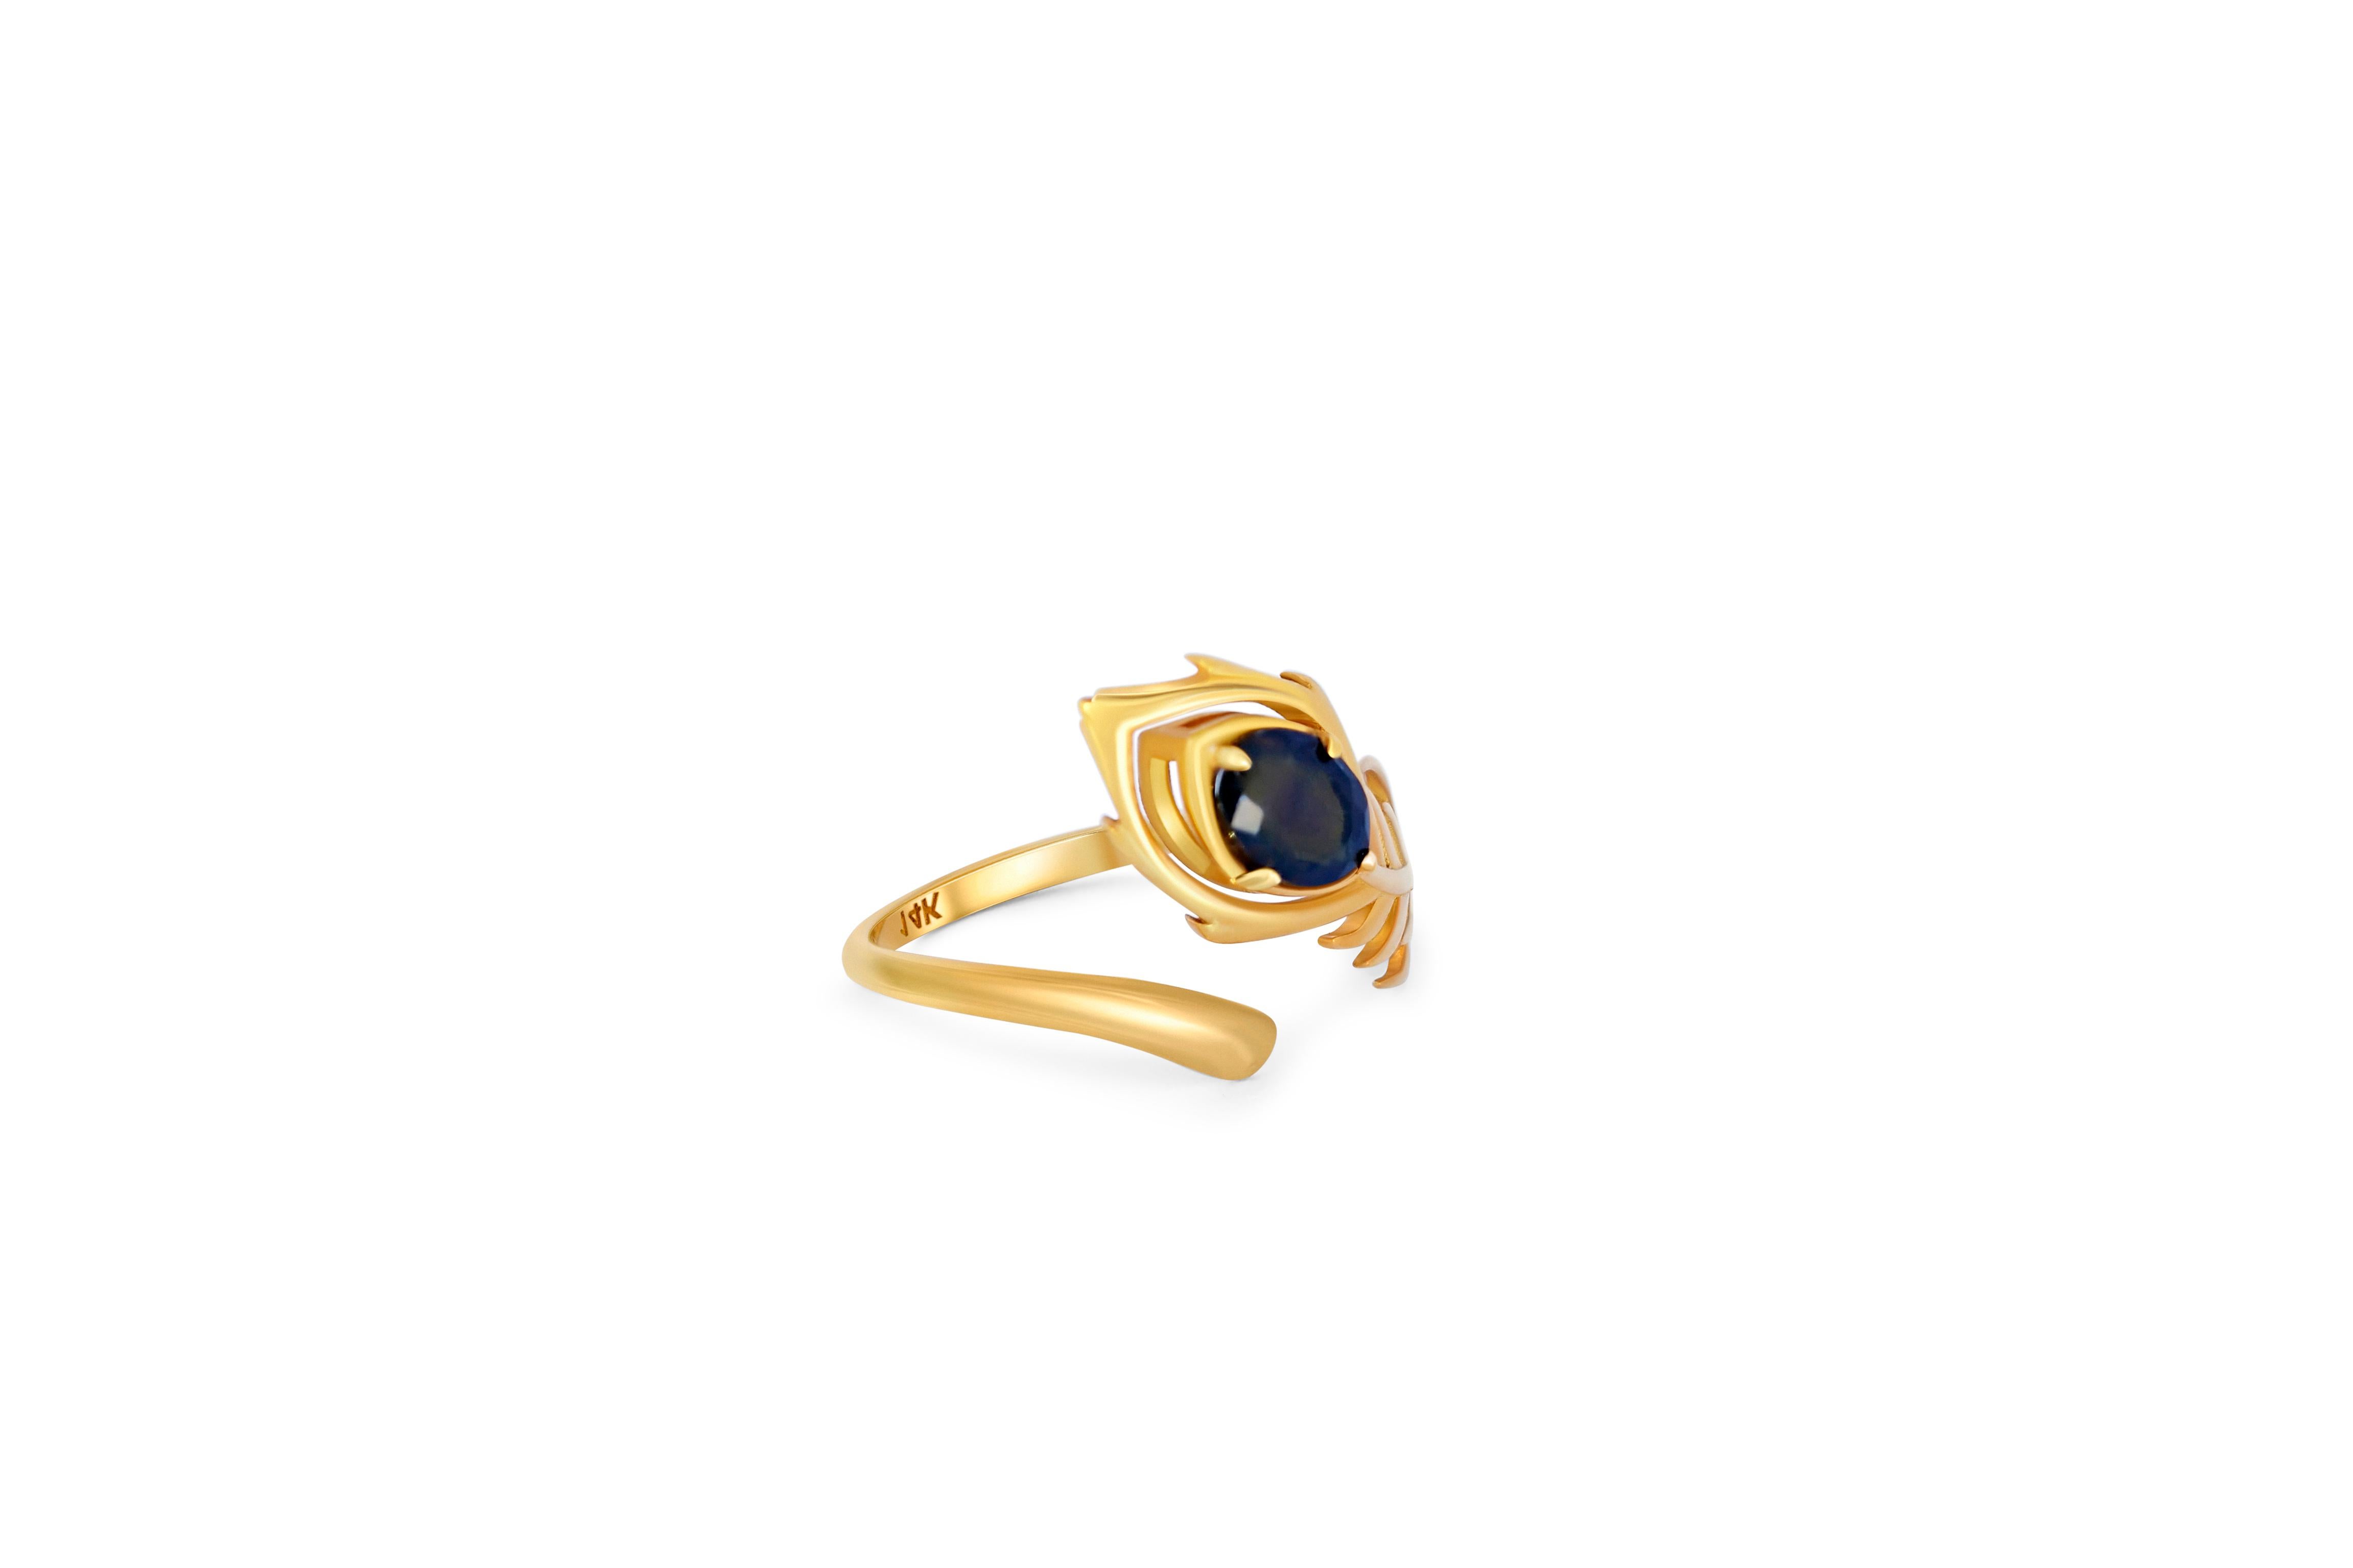 Modern 14k Gold ring with garnets and ruby. For Sale